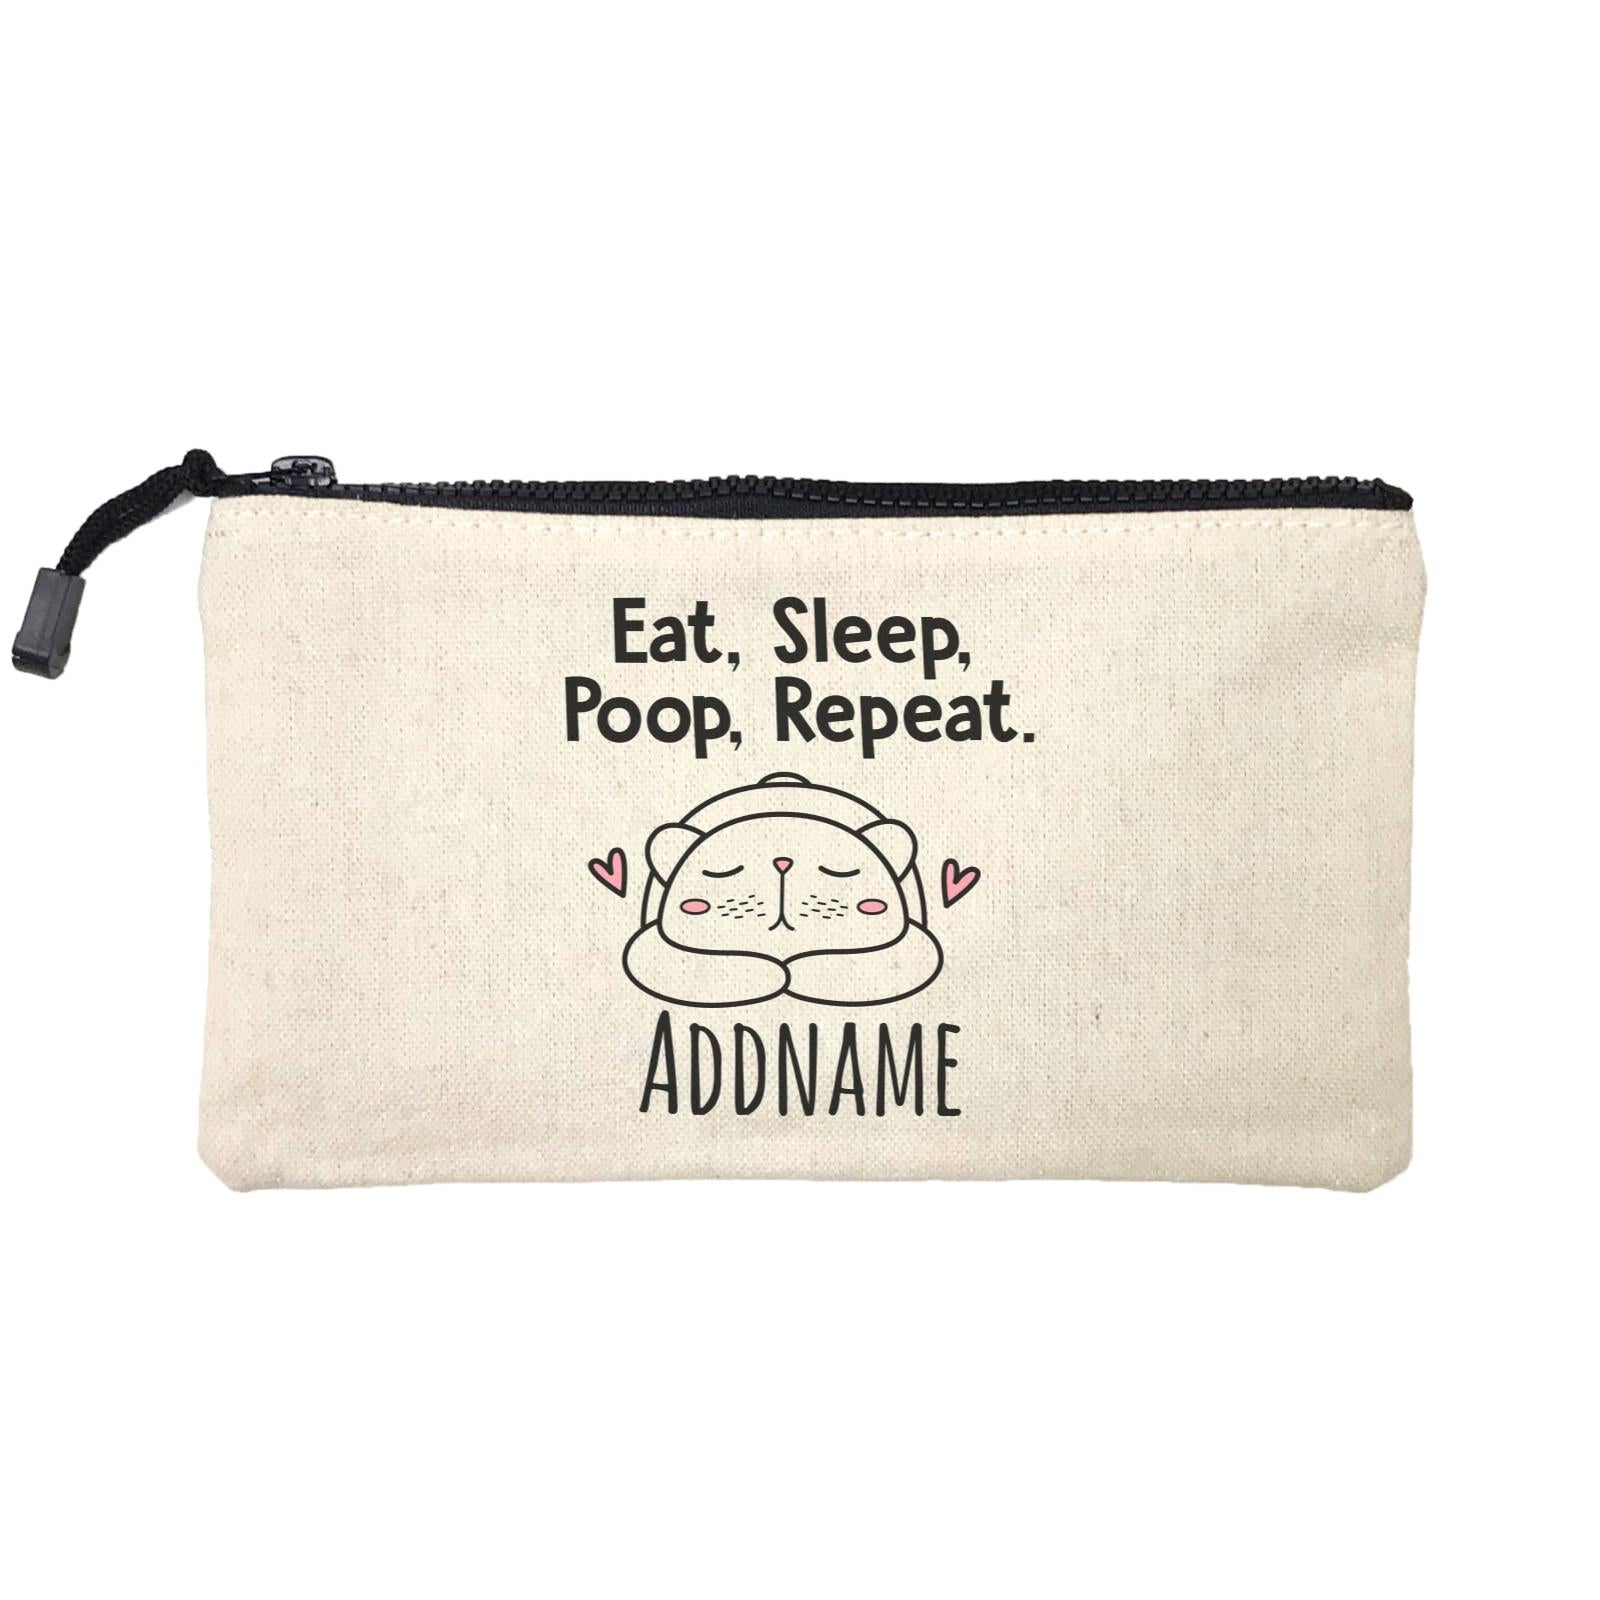 Drawn Baby Elements Eat, Sleep, Poop, Repeat Bear Addname Mini Accessories Stationery Pouch